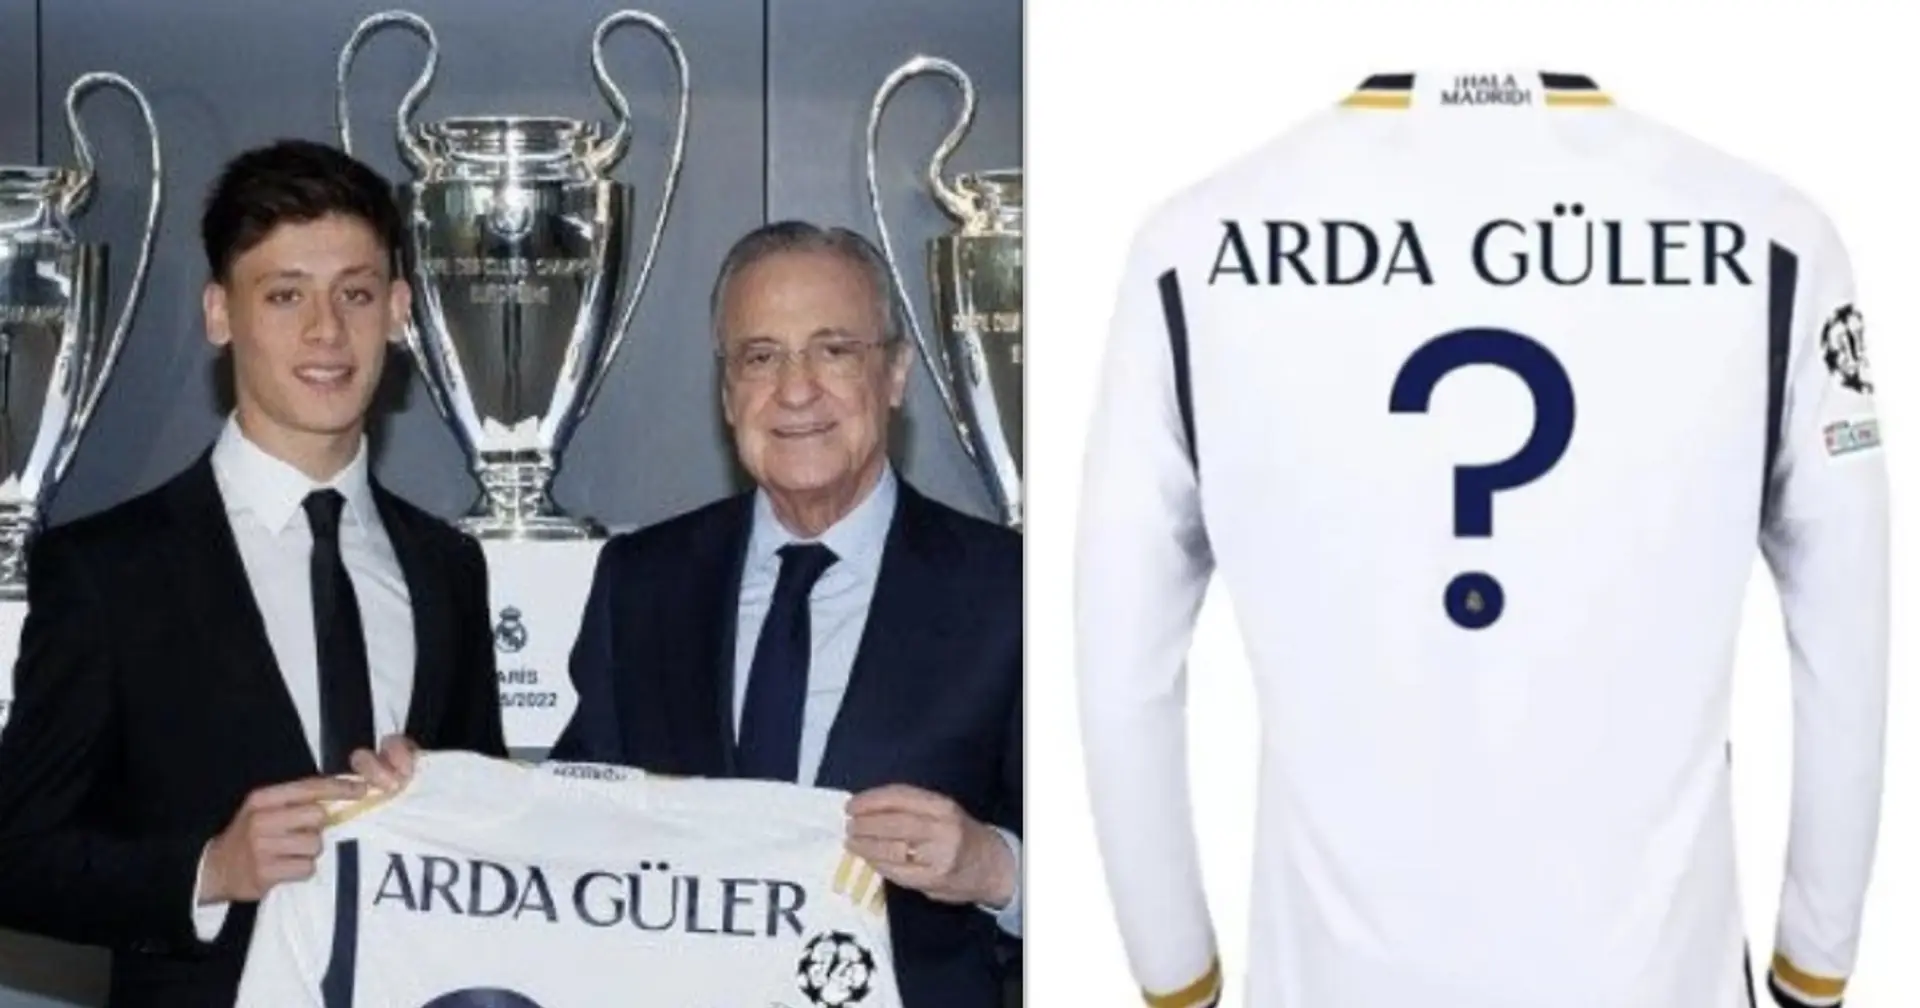 Arda Guler's squad number at Real Madrid unveiled